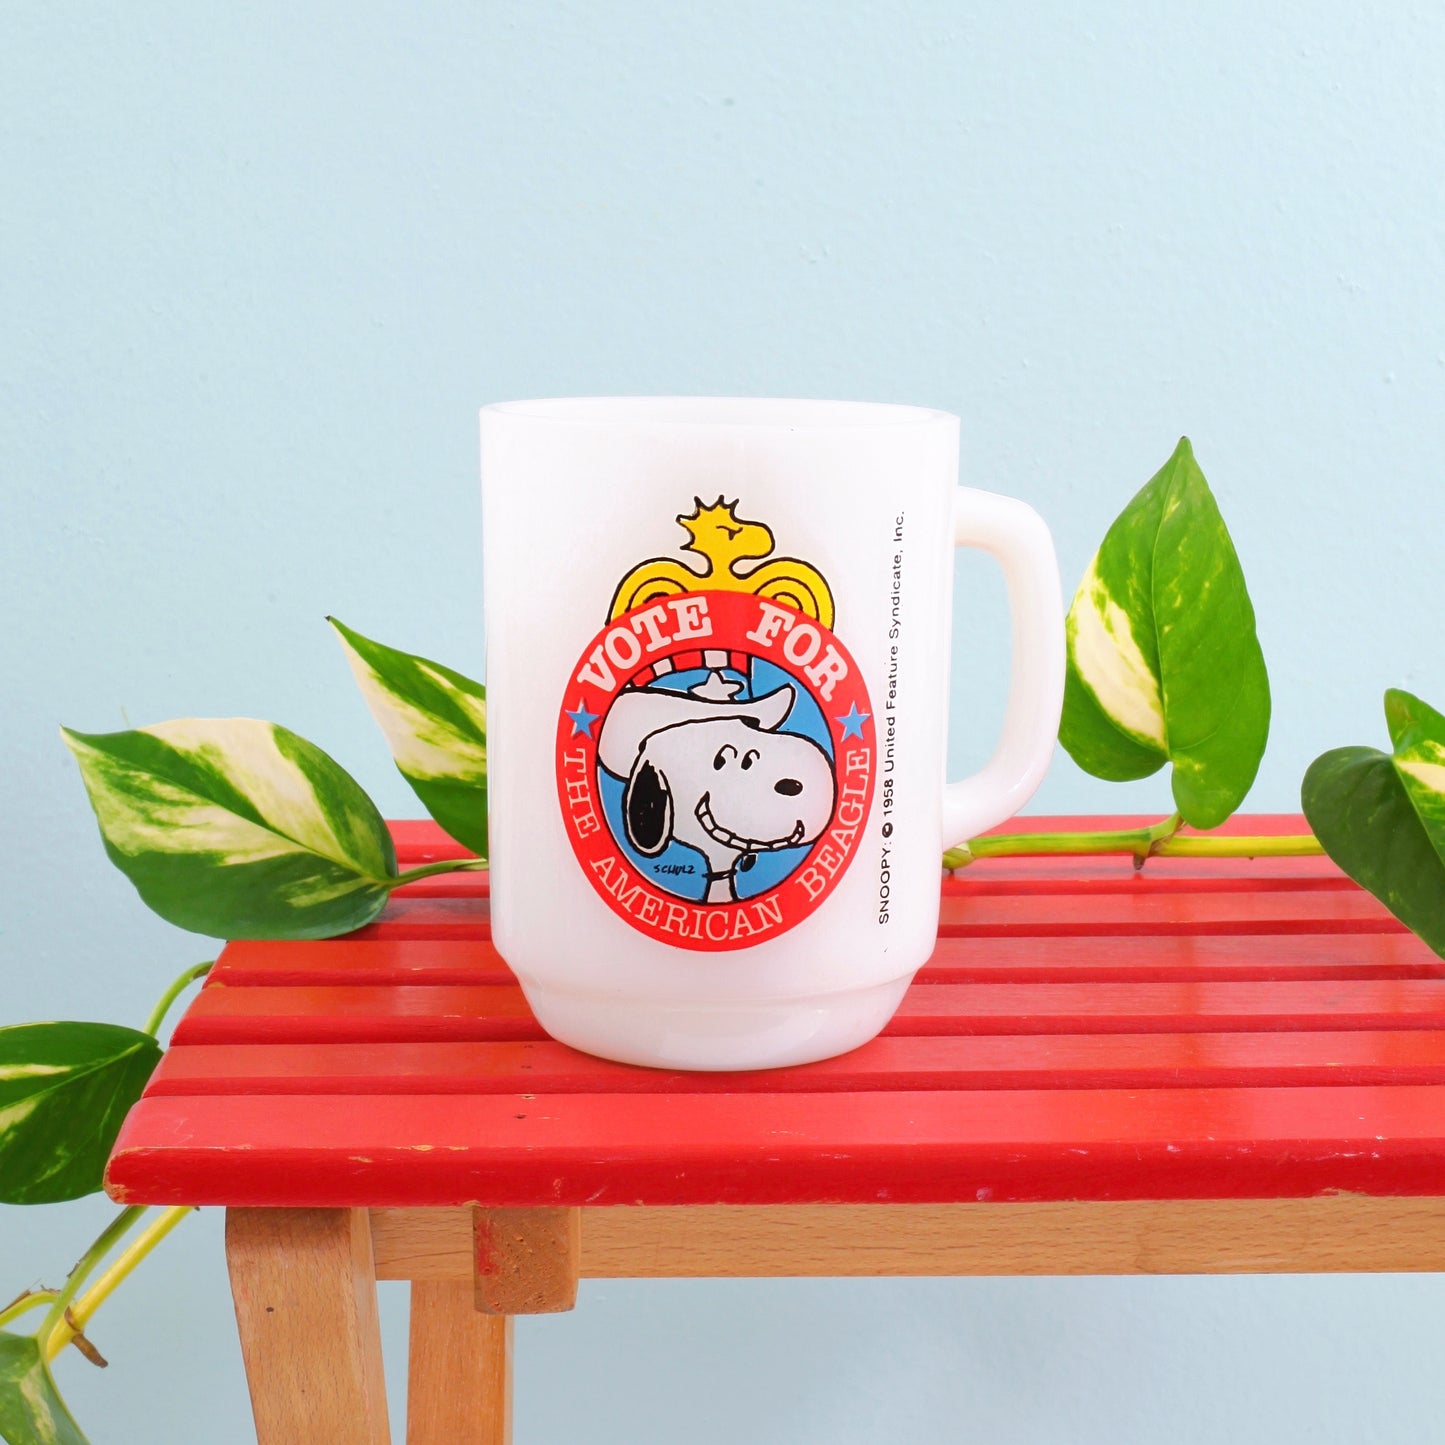 SOLD - Vintage Milk Glass Snoopy Mug / Vote For The American Beagle